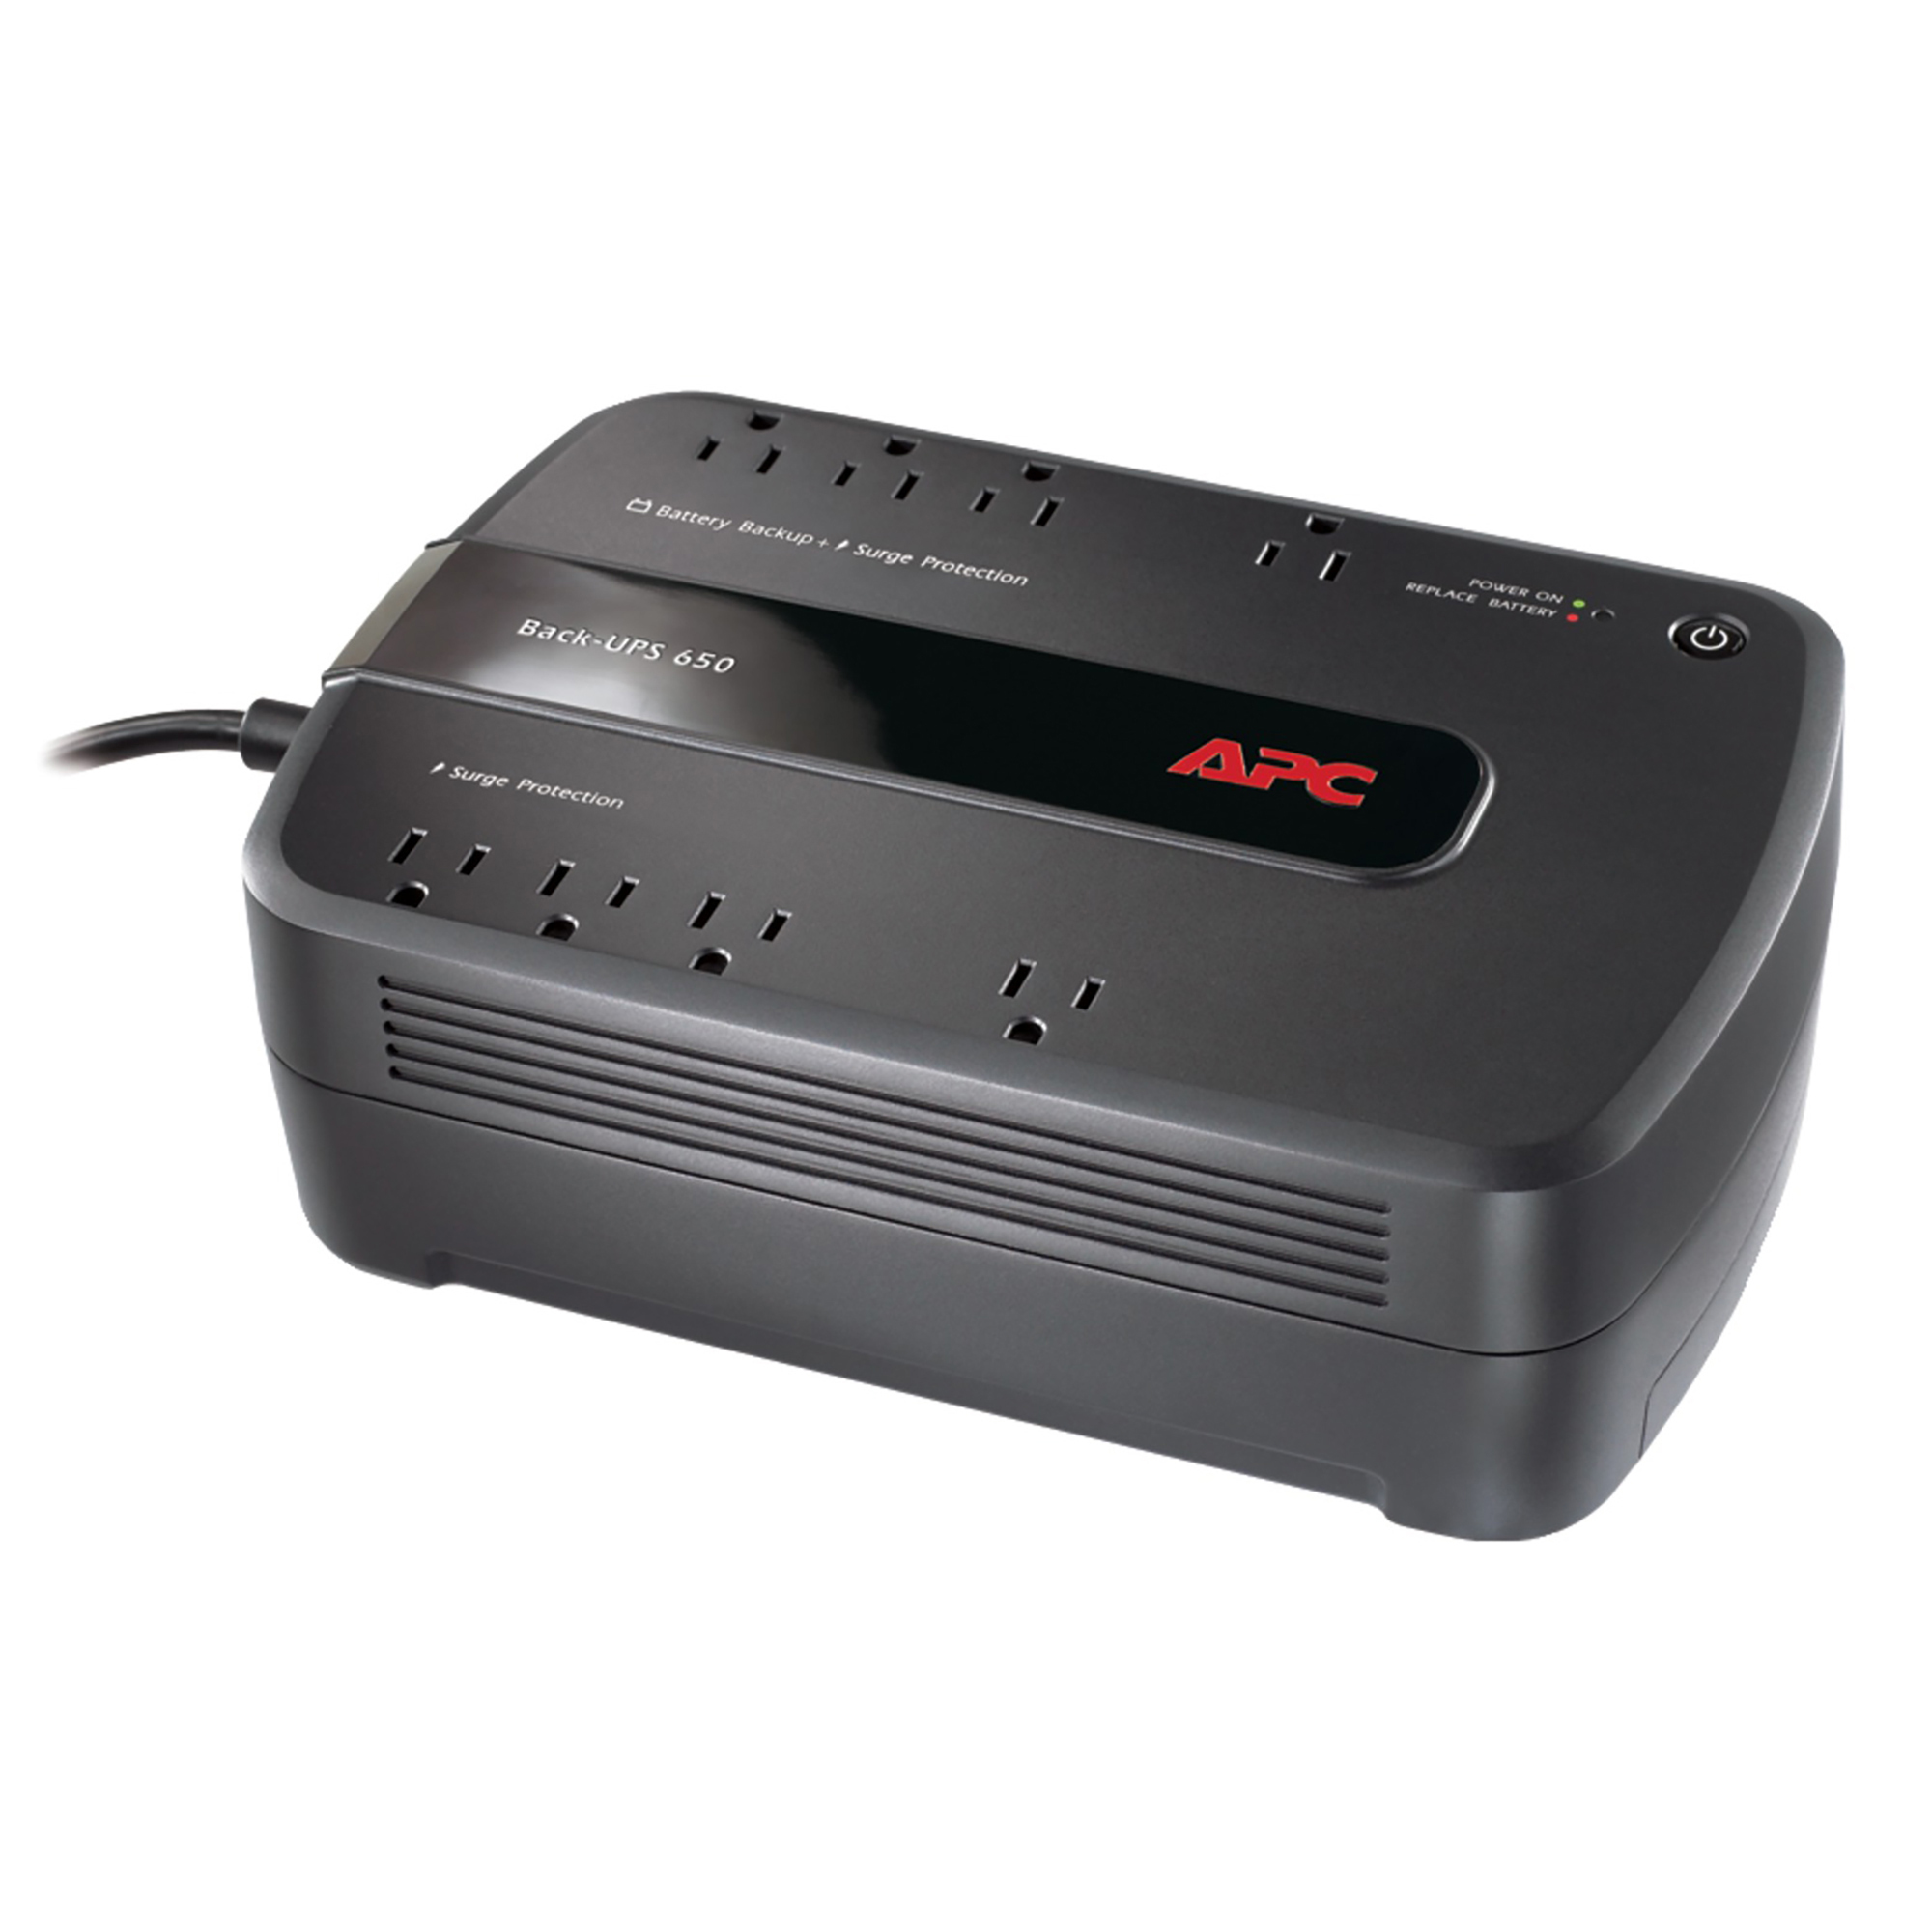 APC, Back-UPS 650 8-Outlet 650VA System, Running Watts 390 W, Model BE650G1